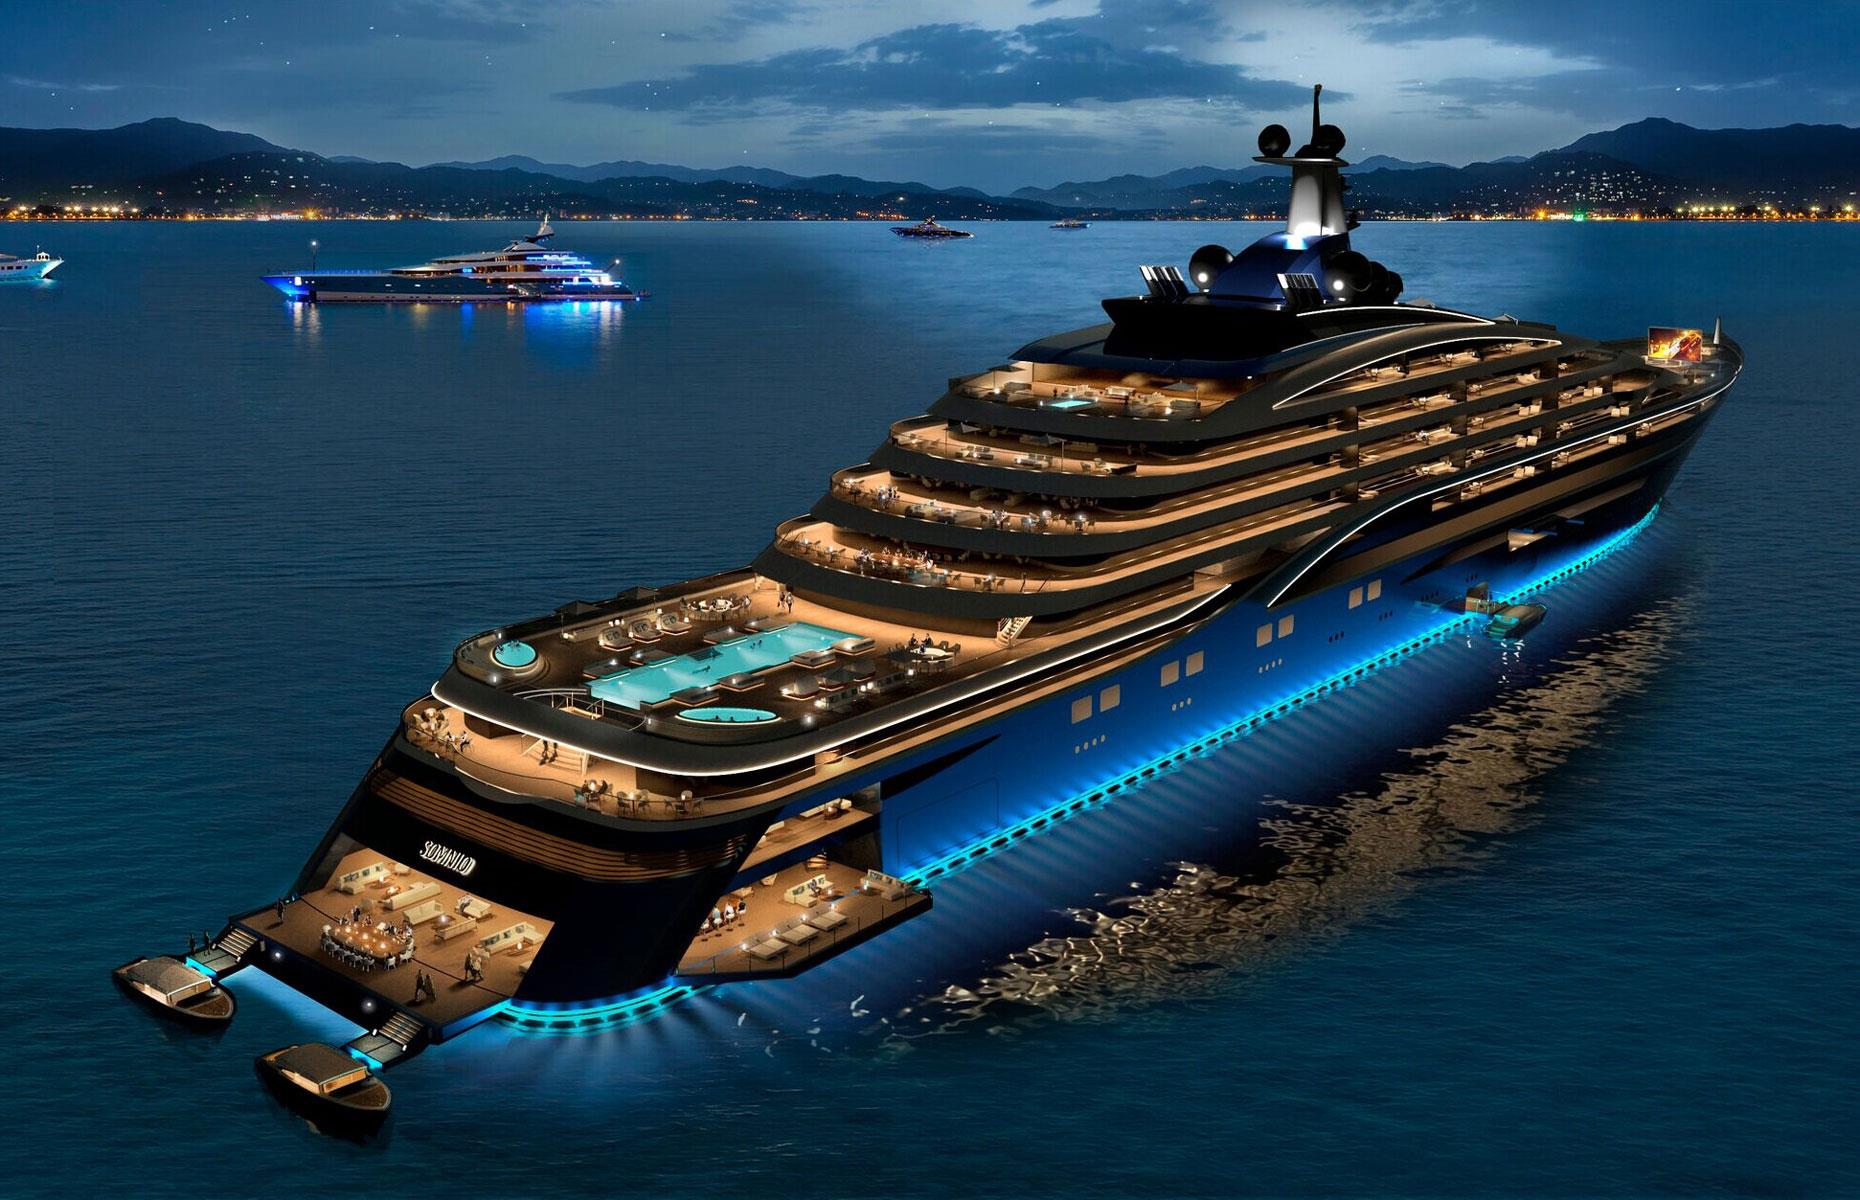 <p>Putting this year's other launches firmly in the shade, <em>Somnio </em>spans a colossal 728 feet (222m), making it the largest superyacht ever built.</p>  <p>The world's first "yacht-liner", this $600 million (£470m) floating palace for the mega-rich is billed as "the most exclusive address in the world" and will cruise the planet's iconic yachting destinations, from Monaco to French Polynesia.</p>  <p><em>Somnio </em>features 39 luxe private residences and a wealth of "six-star" amenities, including an enormous resort-style swimming pool, premium spa, opulent cinema, gourmet restaurants, 10,000-bottle wine cellar, and a library.</p>